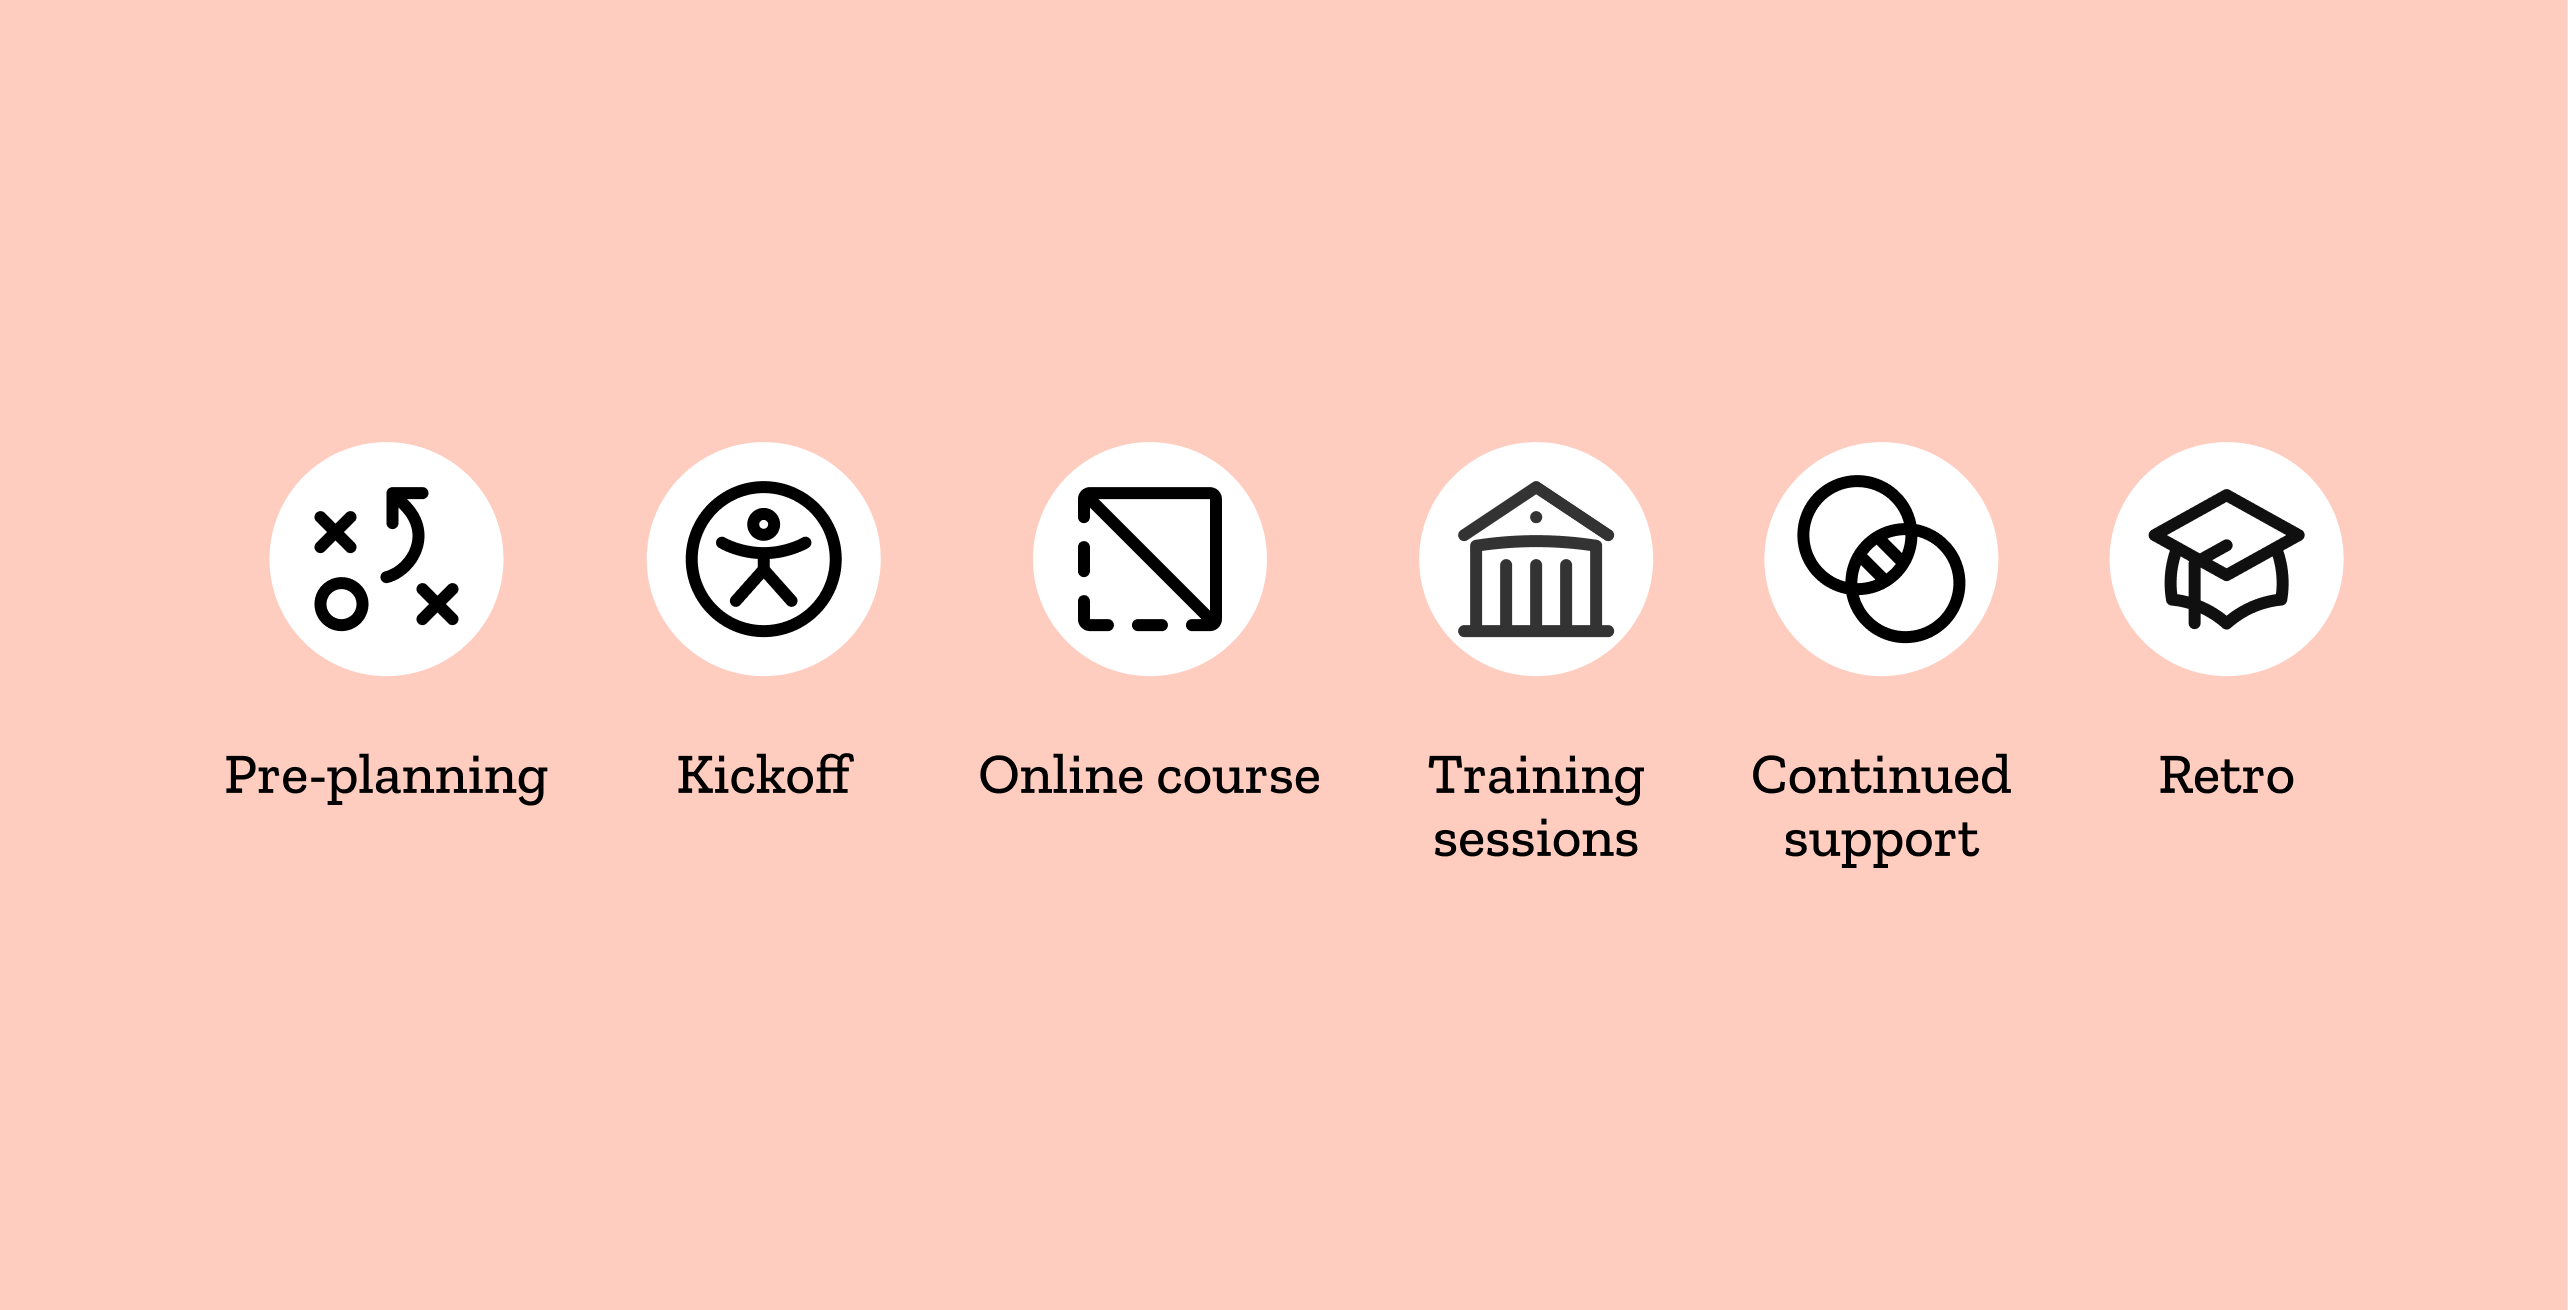 training process includes pre-planning, kick off, online course, training sessions, continued support and retro